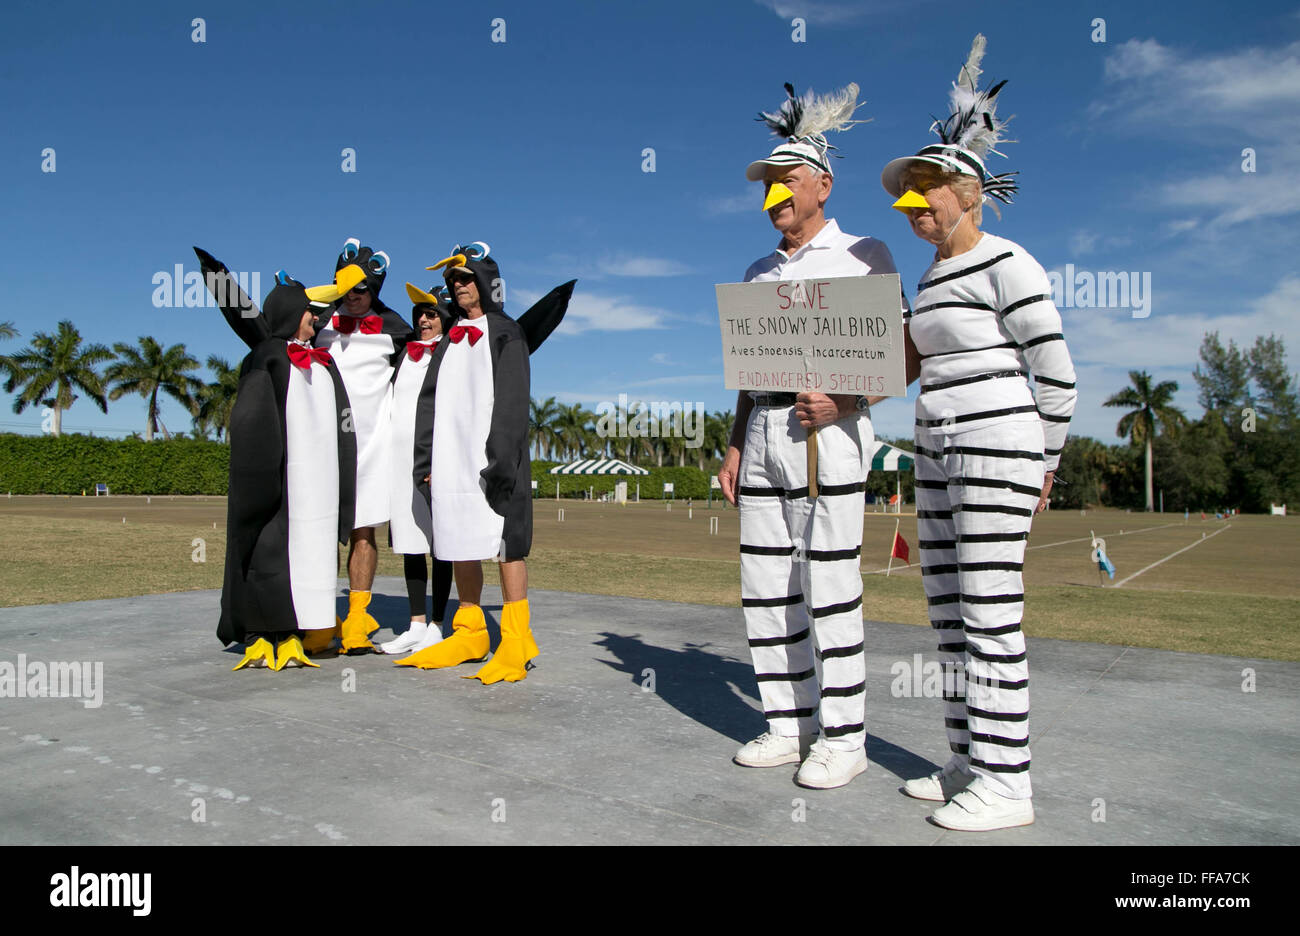 West Palm Beach, Florida, USA. 11th Feb, 2016. Snowy Jailbirds, Barry and Lois Sales, Boca Raton, took home first prize in the costume contest at the 3rd Annual Snowbirds vs Flamingos croquet tournament at the National Croquet Center in West Palm Beach on February 11, 2016. The benefit tournament is open to the public with prizes for costumes and tournament winners. Organizers hope contestants will come out and be kind of silly and have some fun. The benefit has raised money for night time lighting at the center, new cushions for the furniture and general improvements. (Credit Image: © Alle Stock Photo